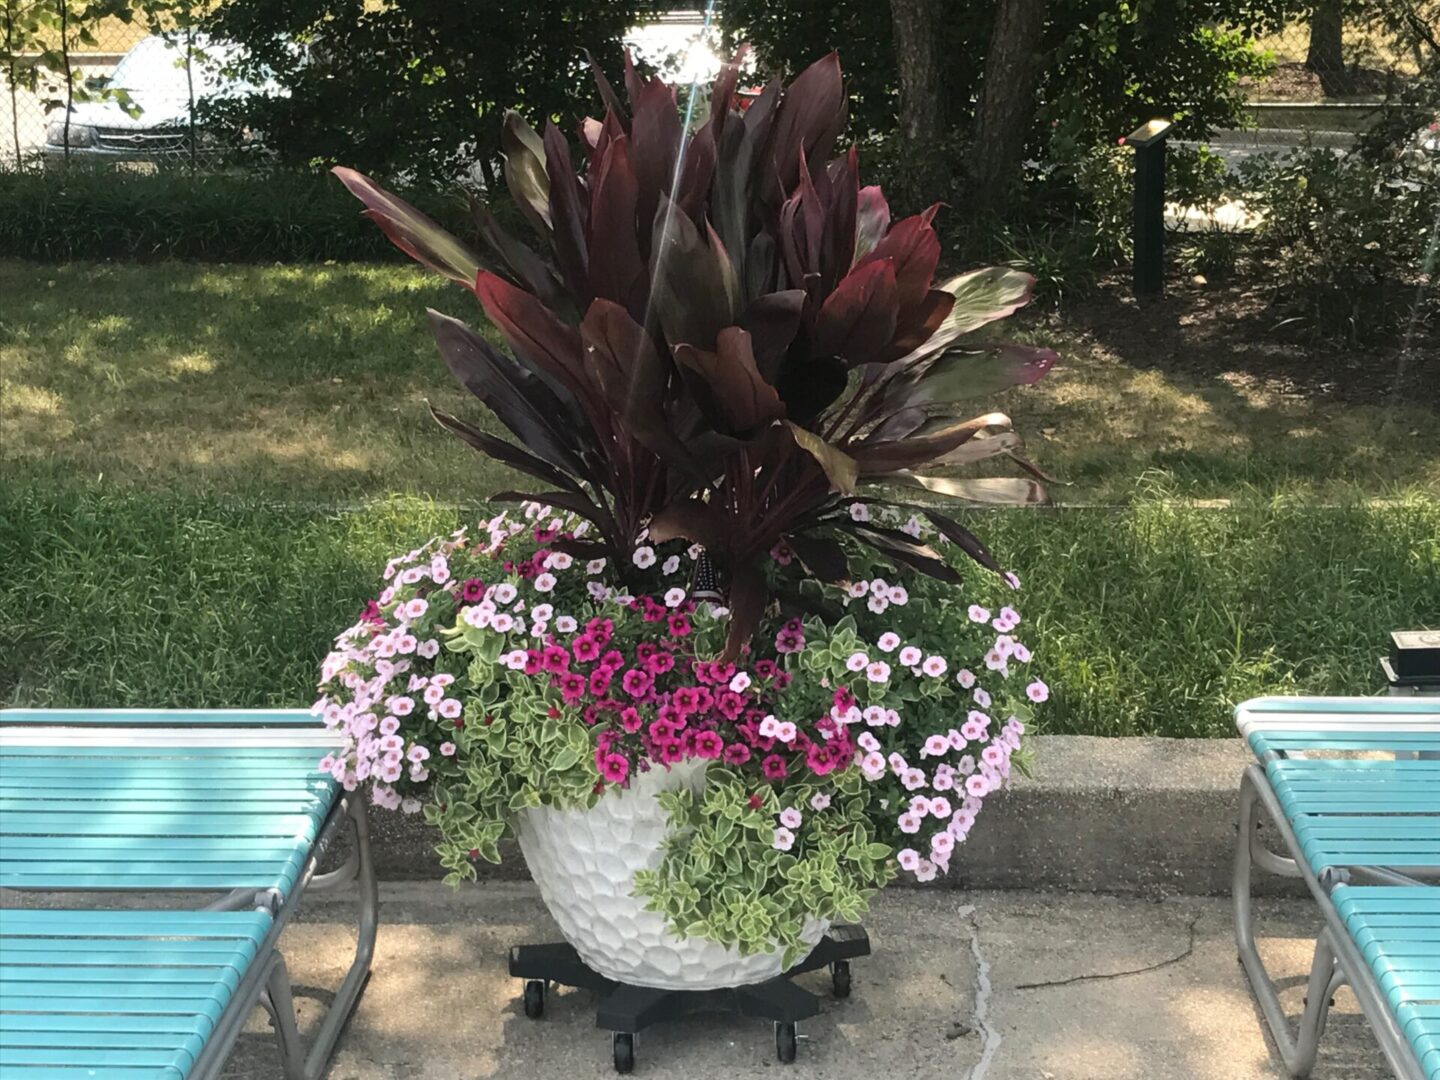 A large planter filled with flowers next to the pool.